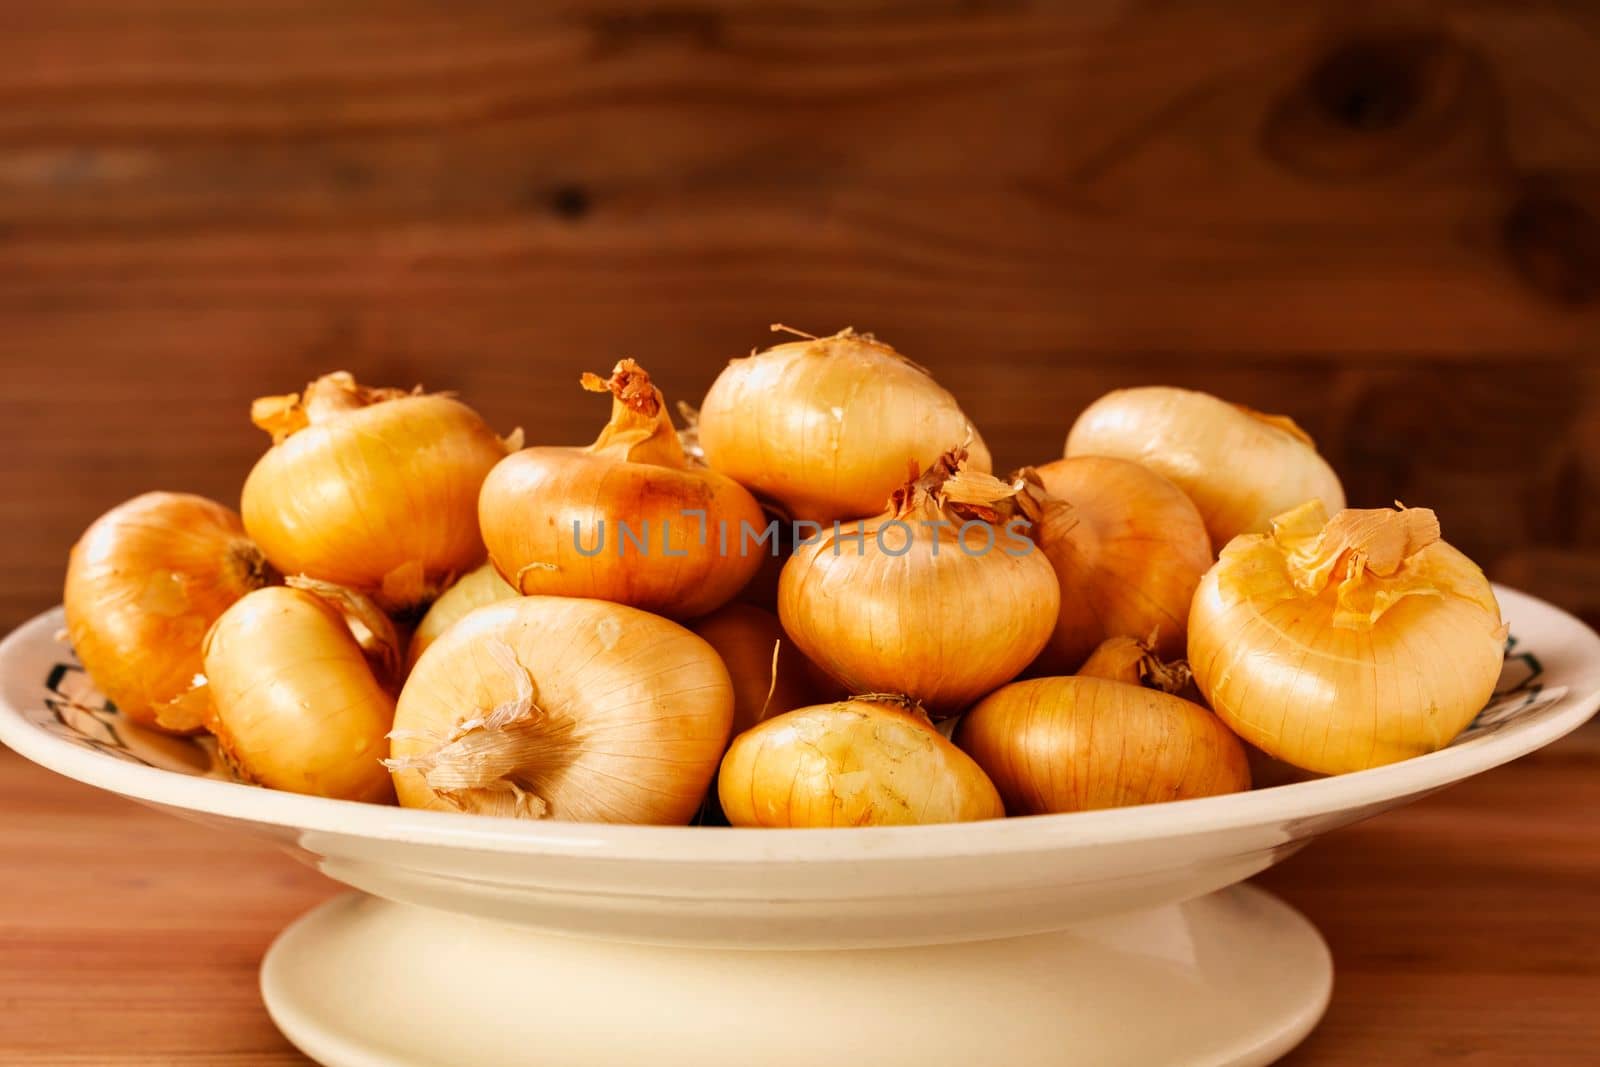 Uncooked onions in plate  by victimewalker